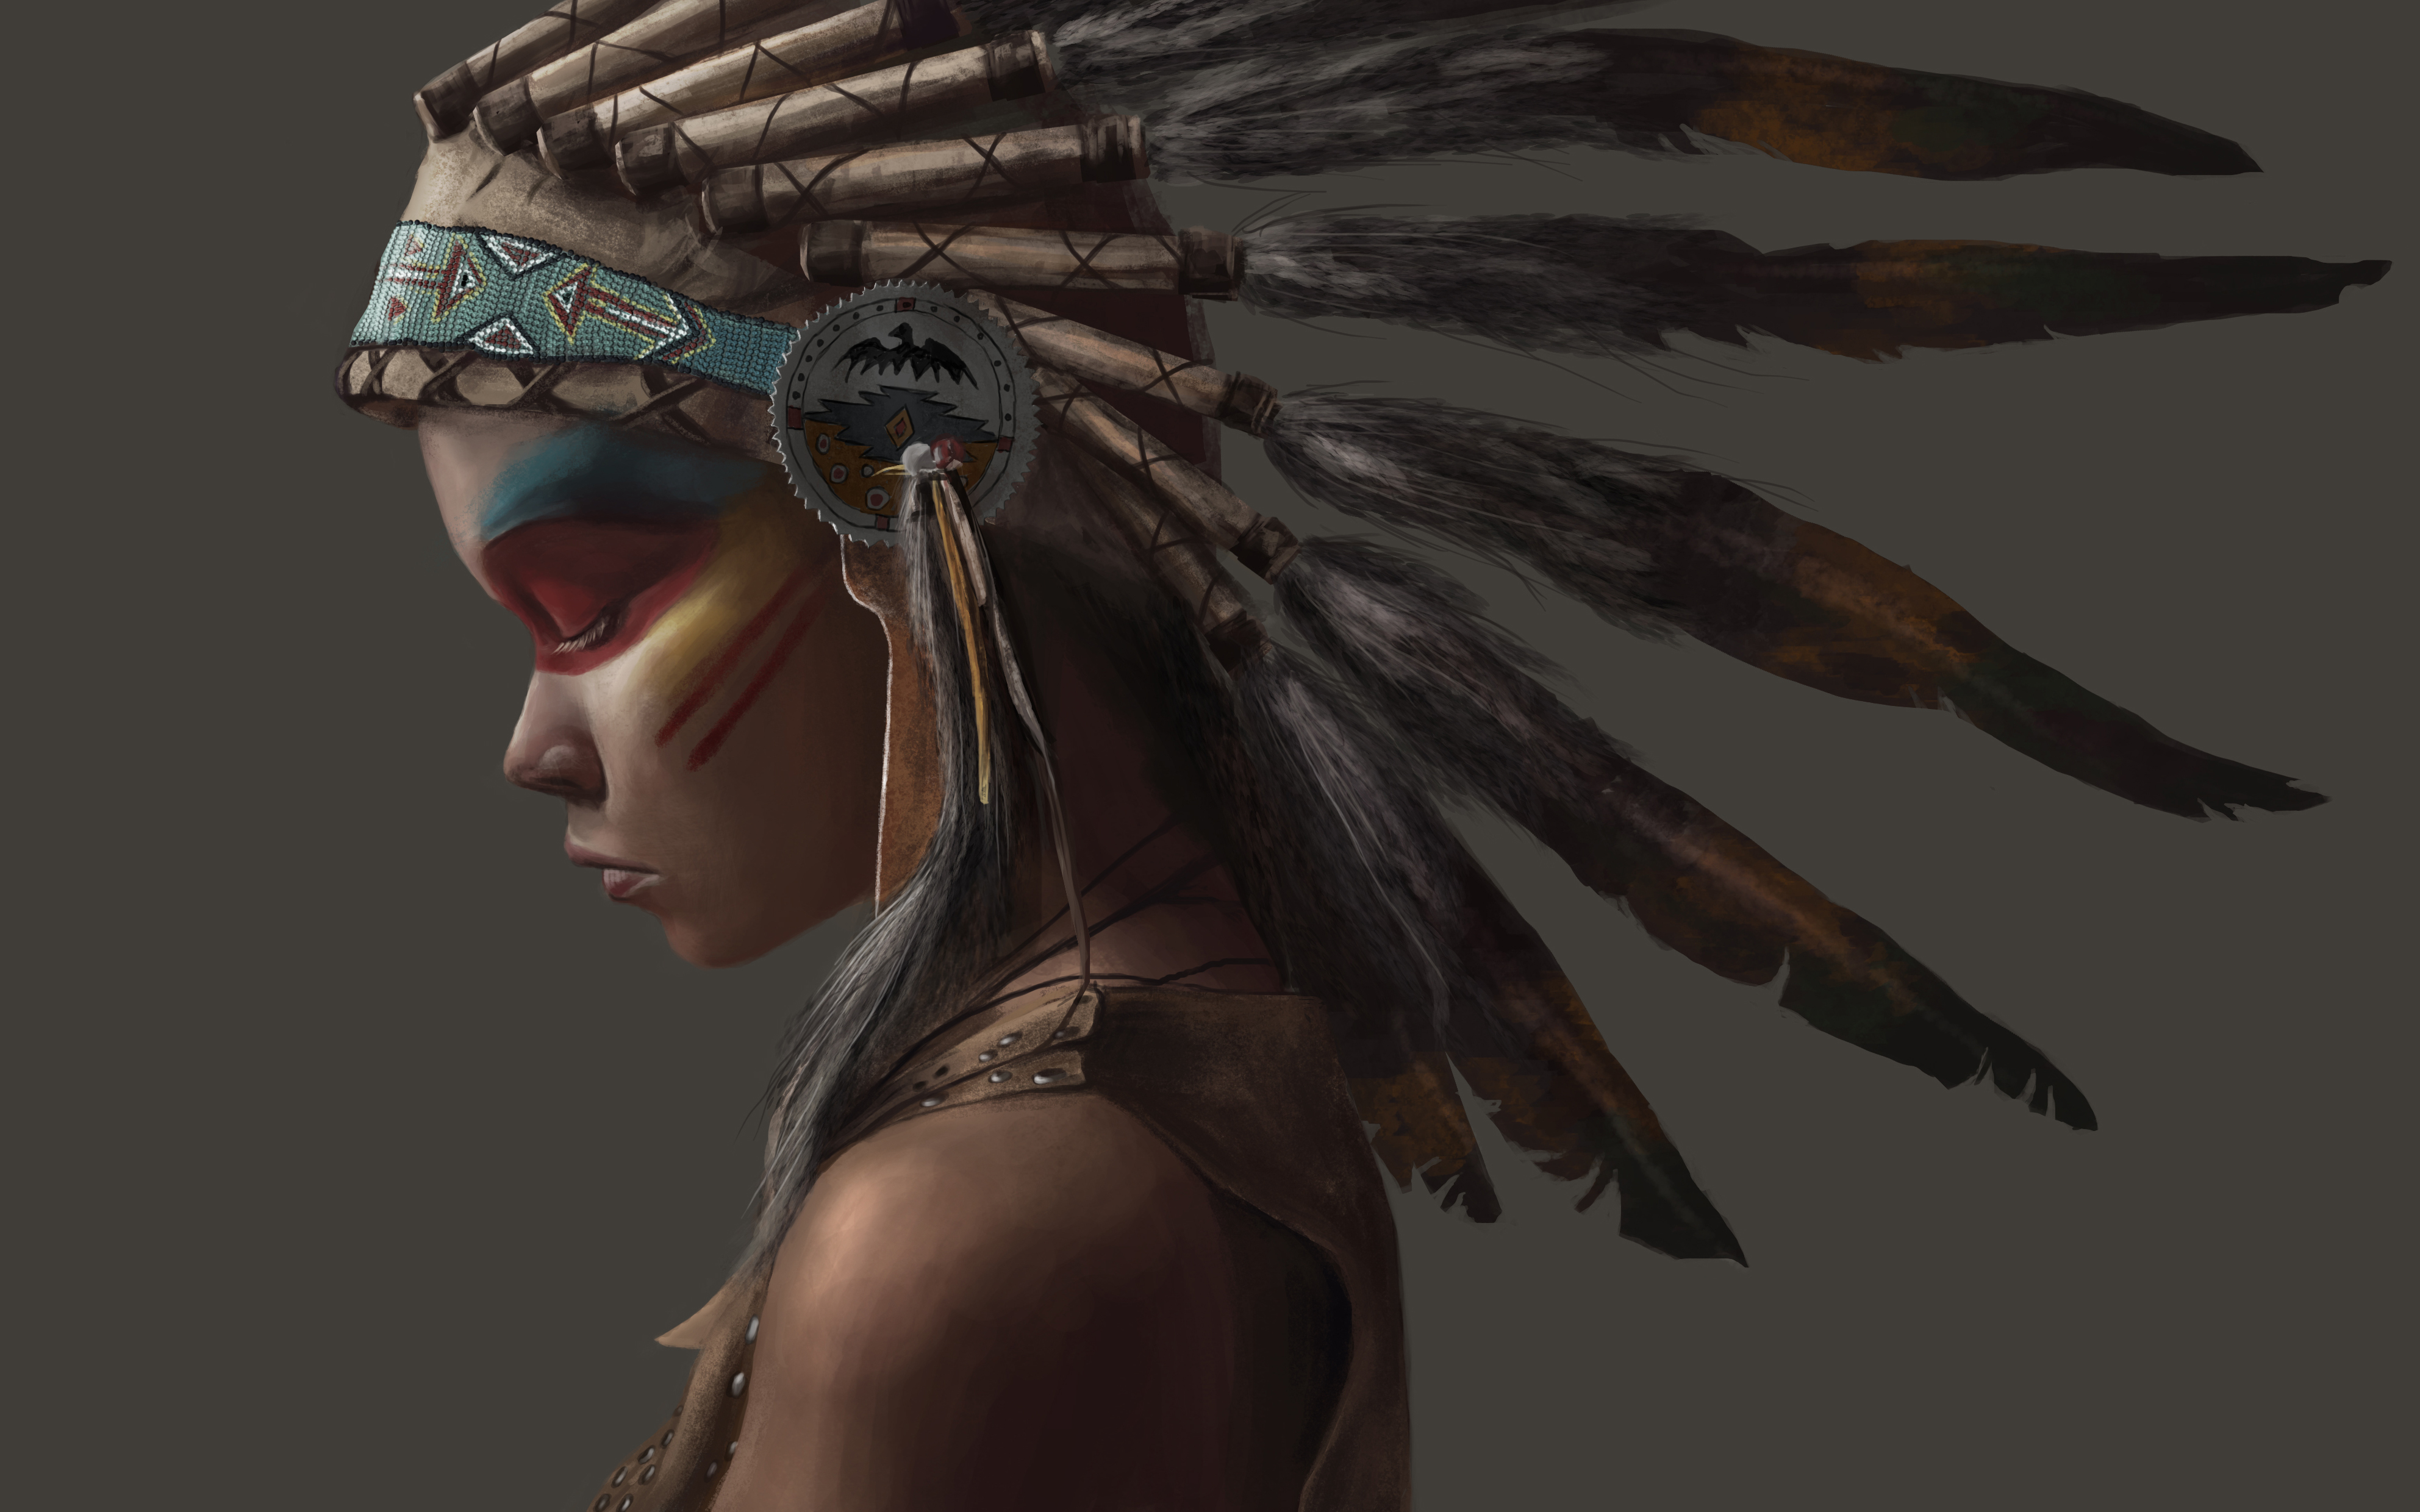 Feathers Indian Women Artwork Fantasy Art Fantasy Girl Closed Eyes Face Profile Simple Background 3968x2480